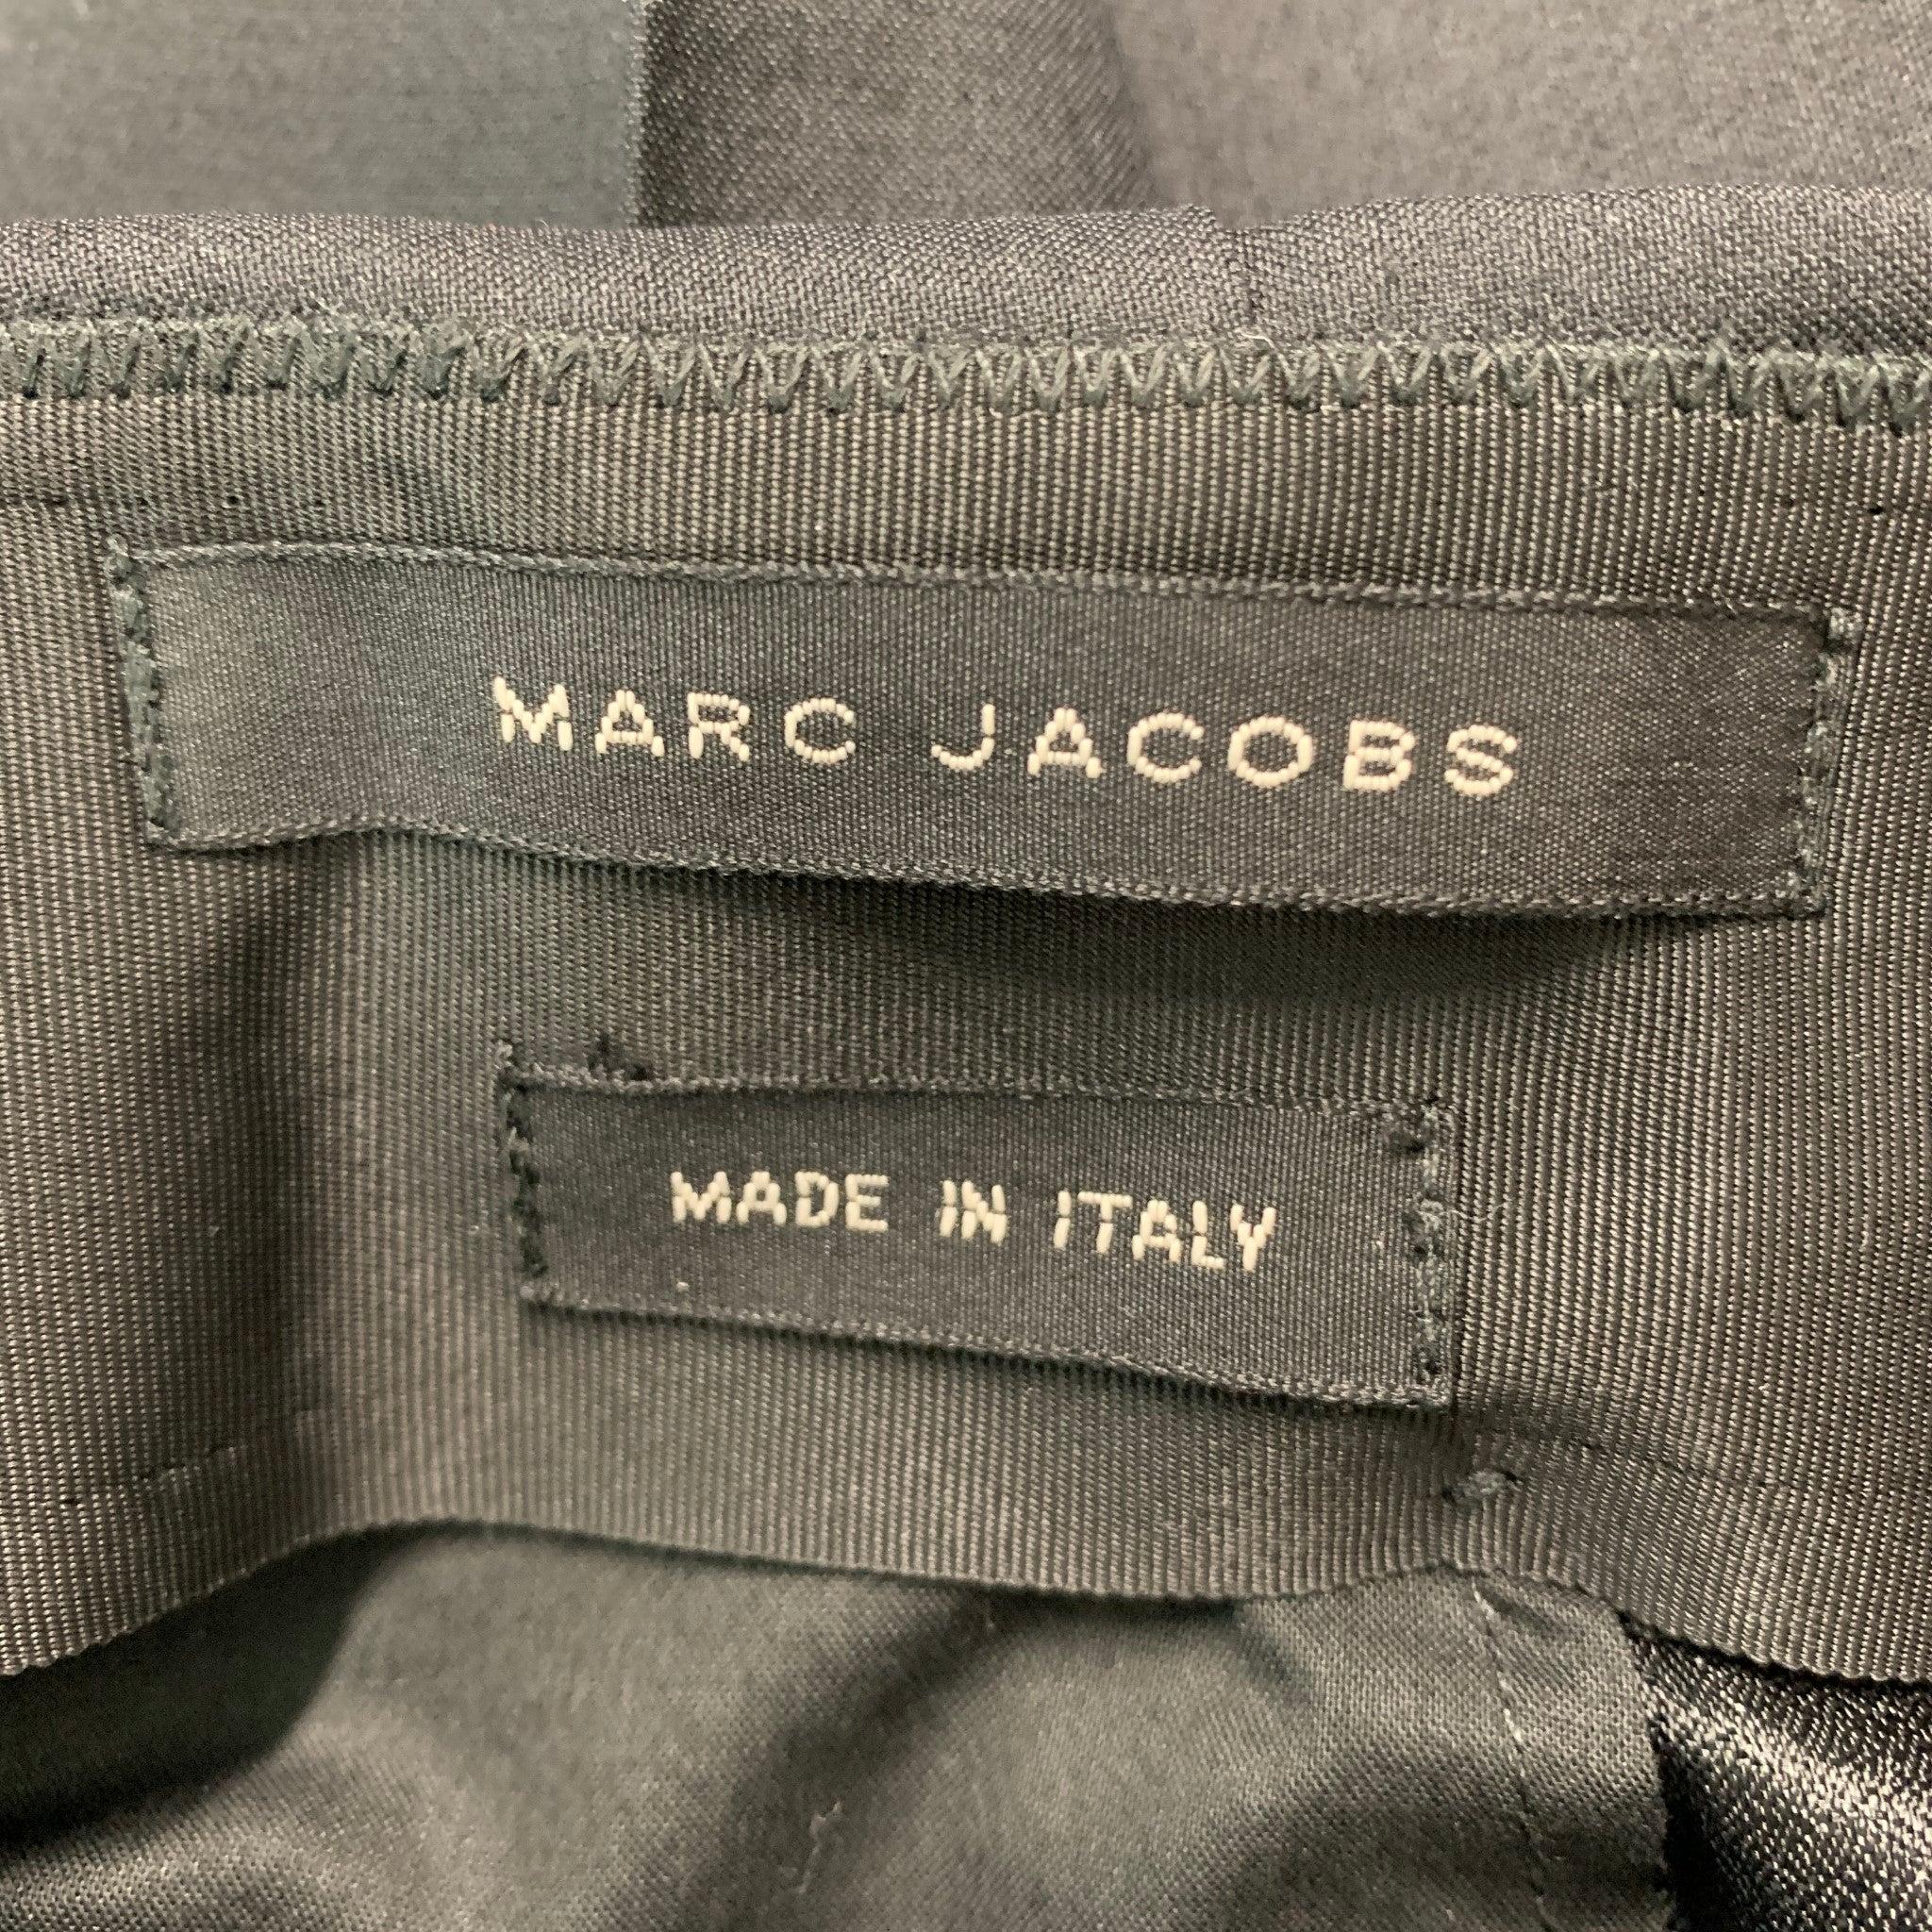 MARC JACOBS Size 32 Black Wool Blend Tuxedo Dress Pants In Excellent Condition For Sale In San Francisco, CA